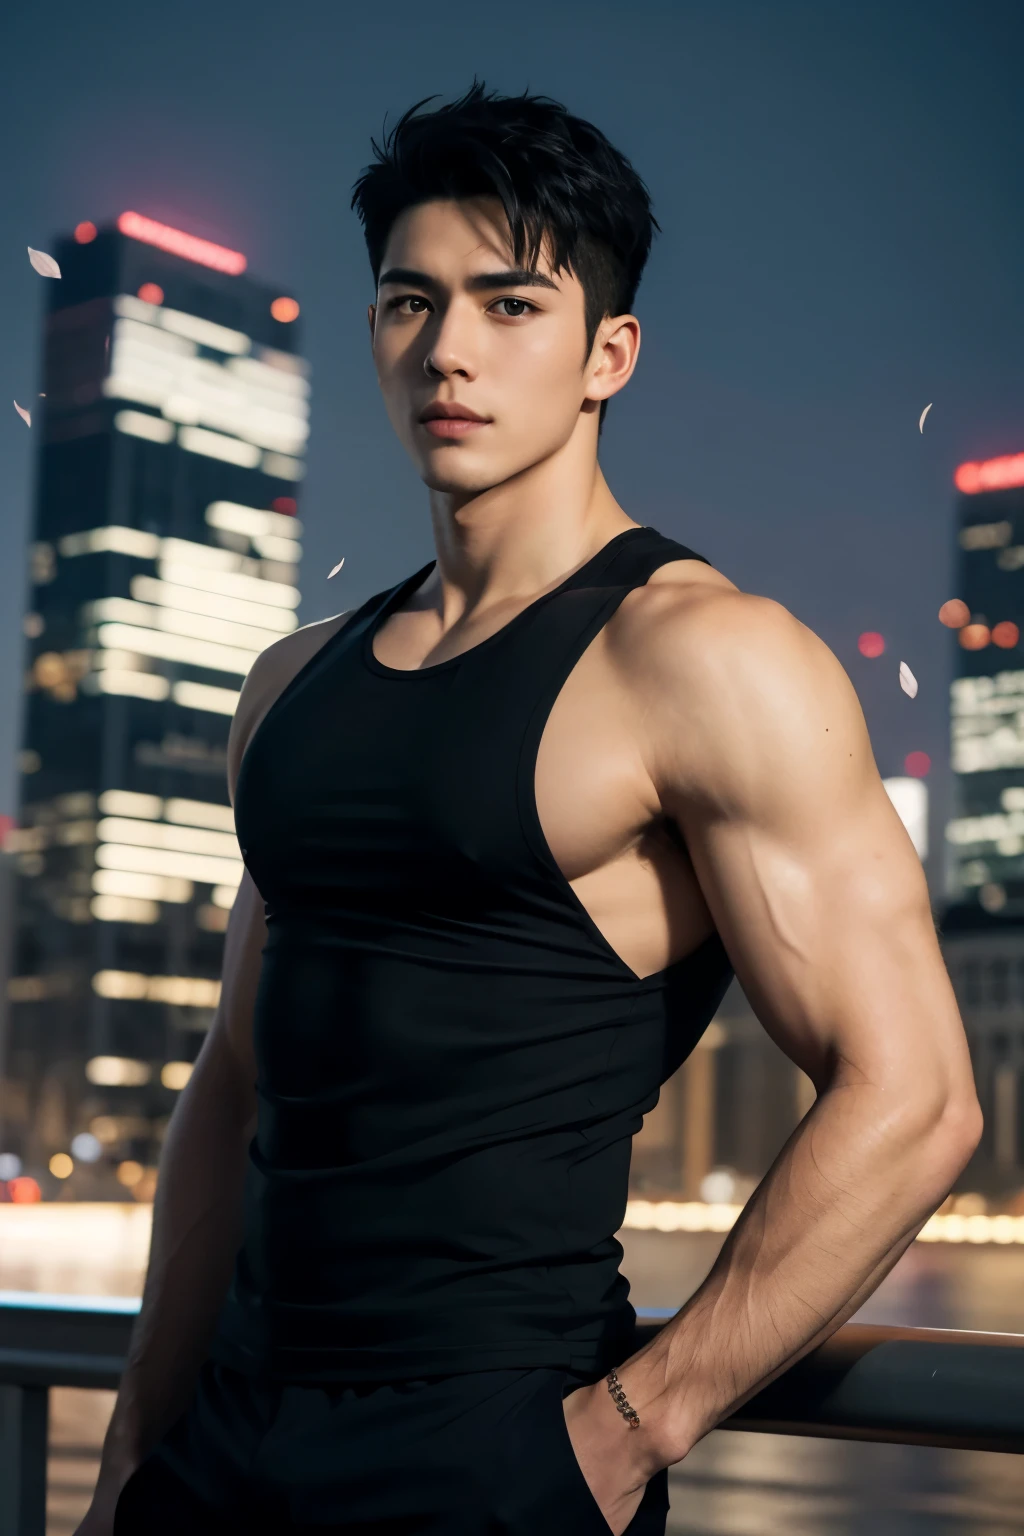 portrait of a 1 boy wearing a tight black tank top, front view, looking at camera, (smirk:0.65), (angry:0.3), cinematic shot on canon 5d ultra realistic, urban atmosphere, skyscrapers, night scene, sakura petals are flying over the background, short hair undercut, (extremely handsome:1.2)
